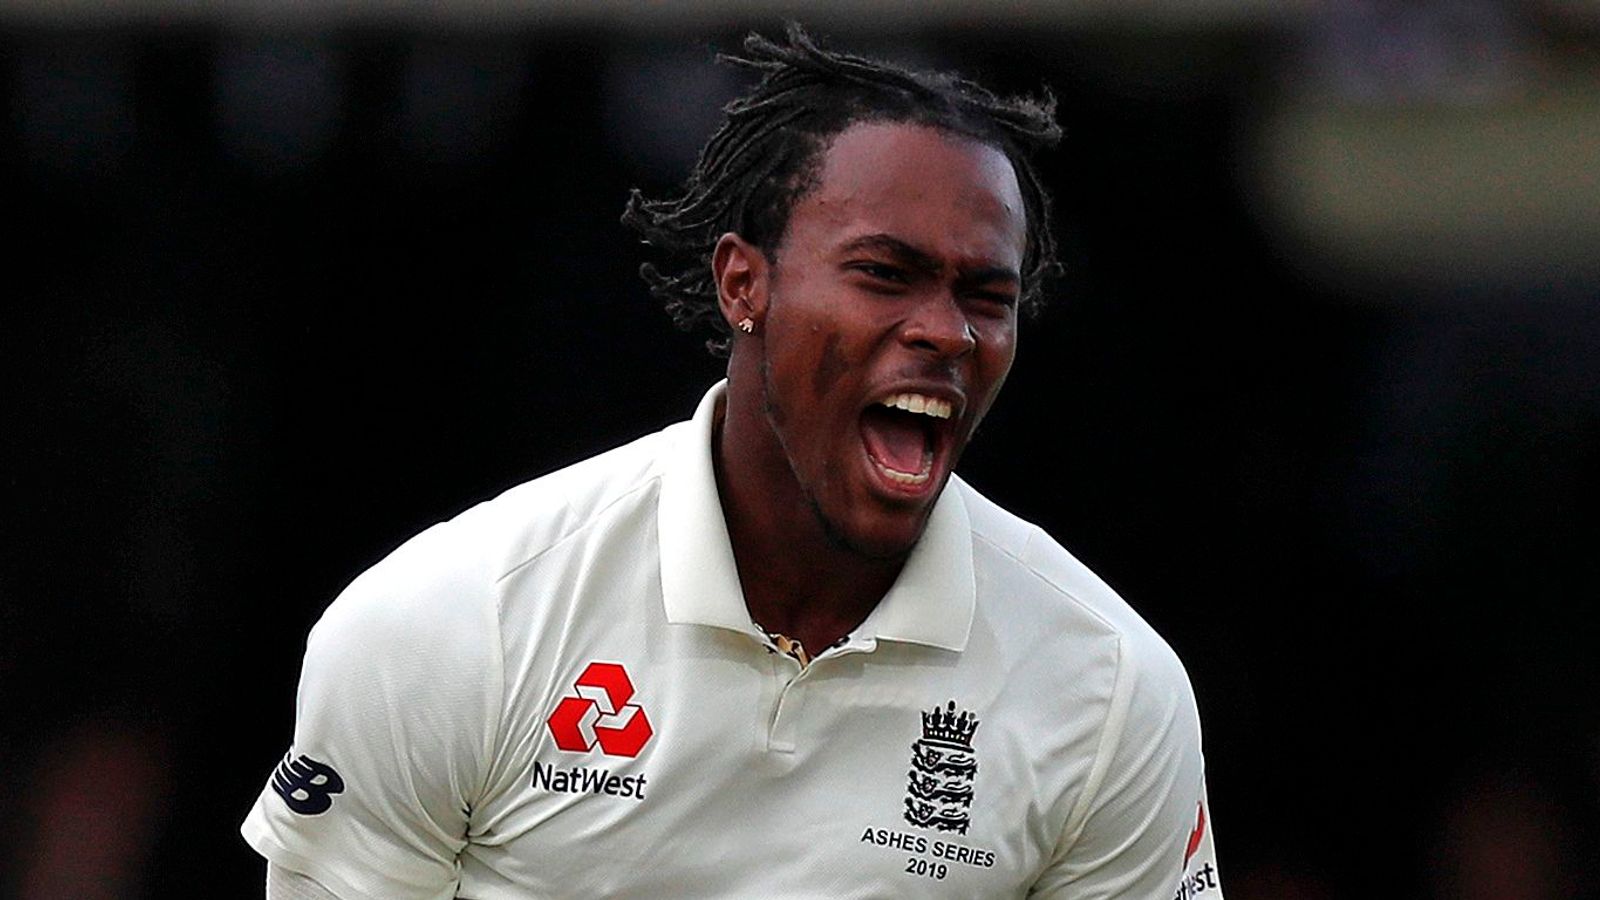 Jofra Archer targeting at least one Ashes Test; England fast bowler says any more would be ‘bonus’ after injury lay-off